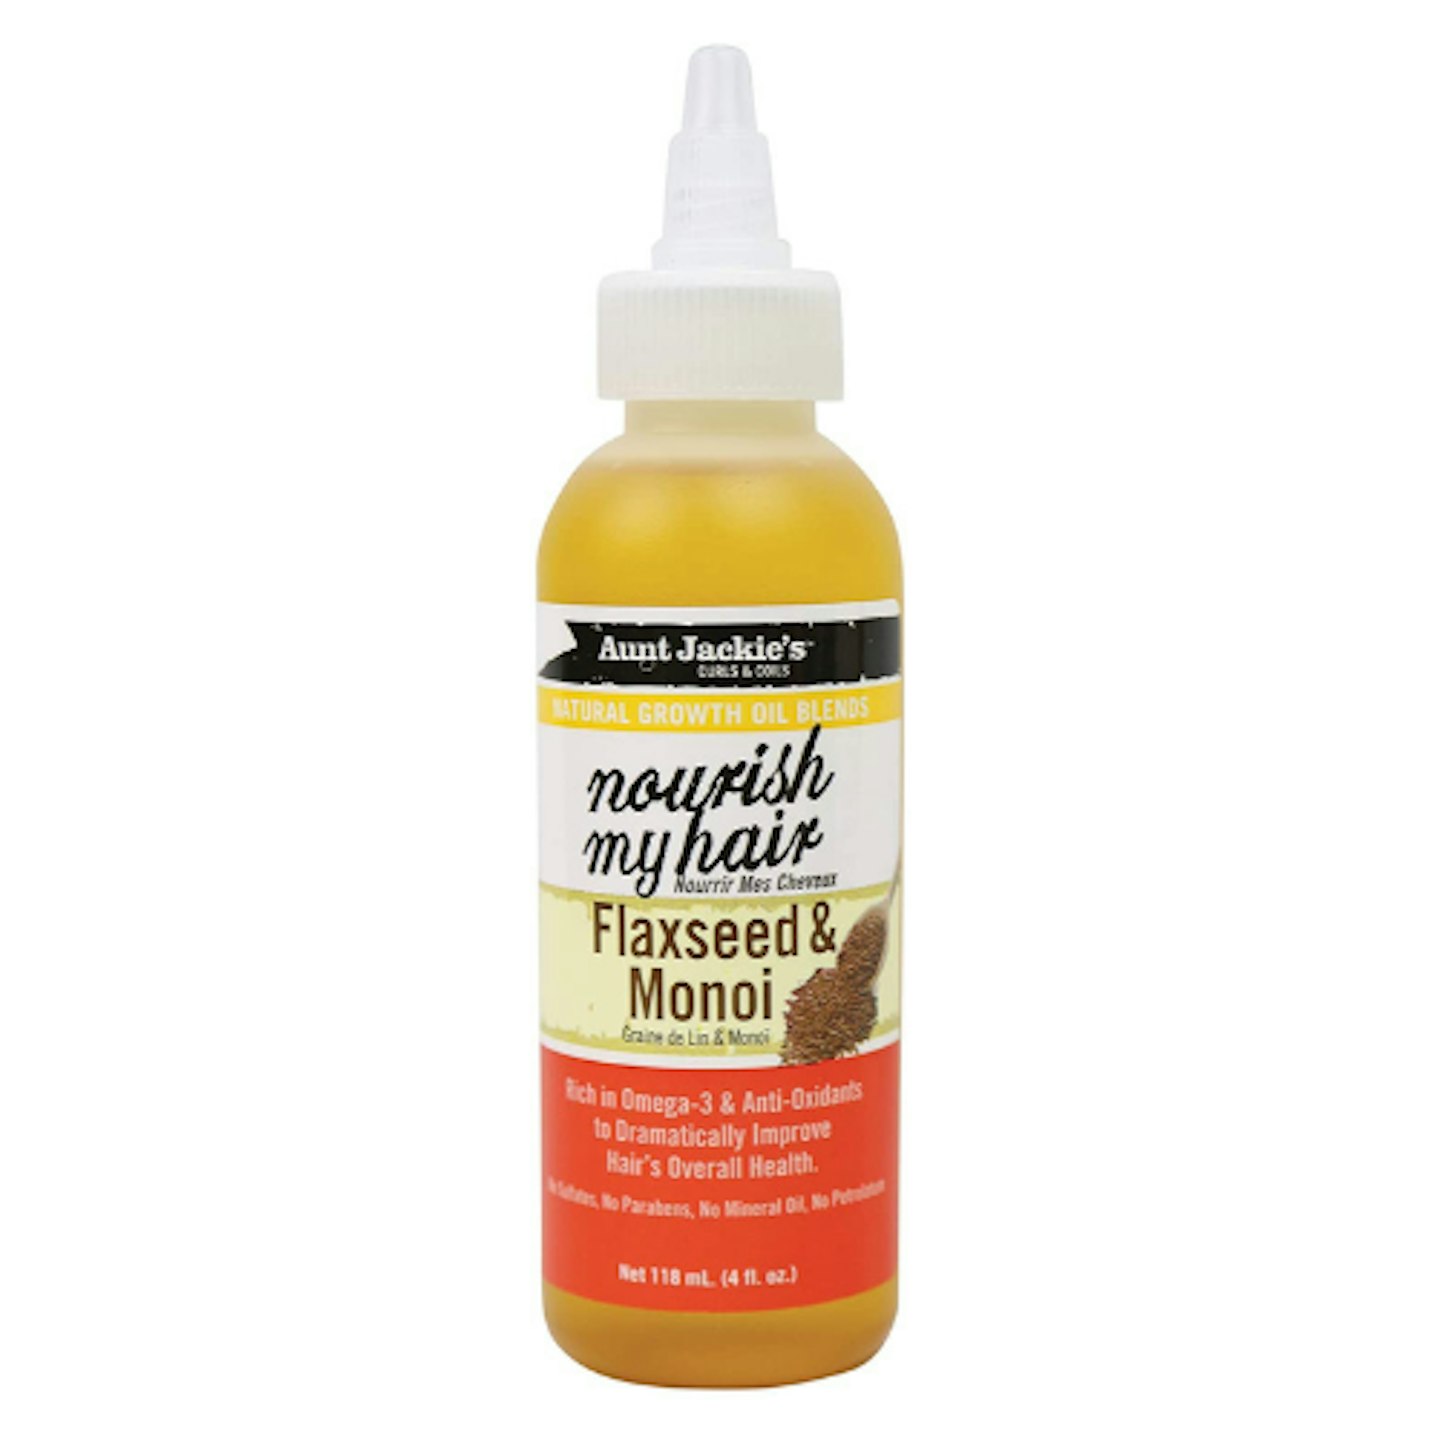 Aunt Jackie's Natural Growth Oil Blends Nourish My Hair on white background